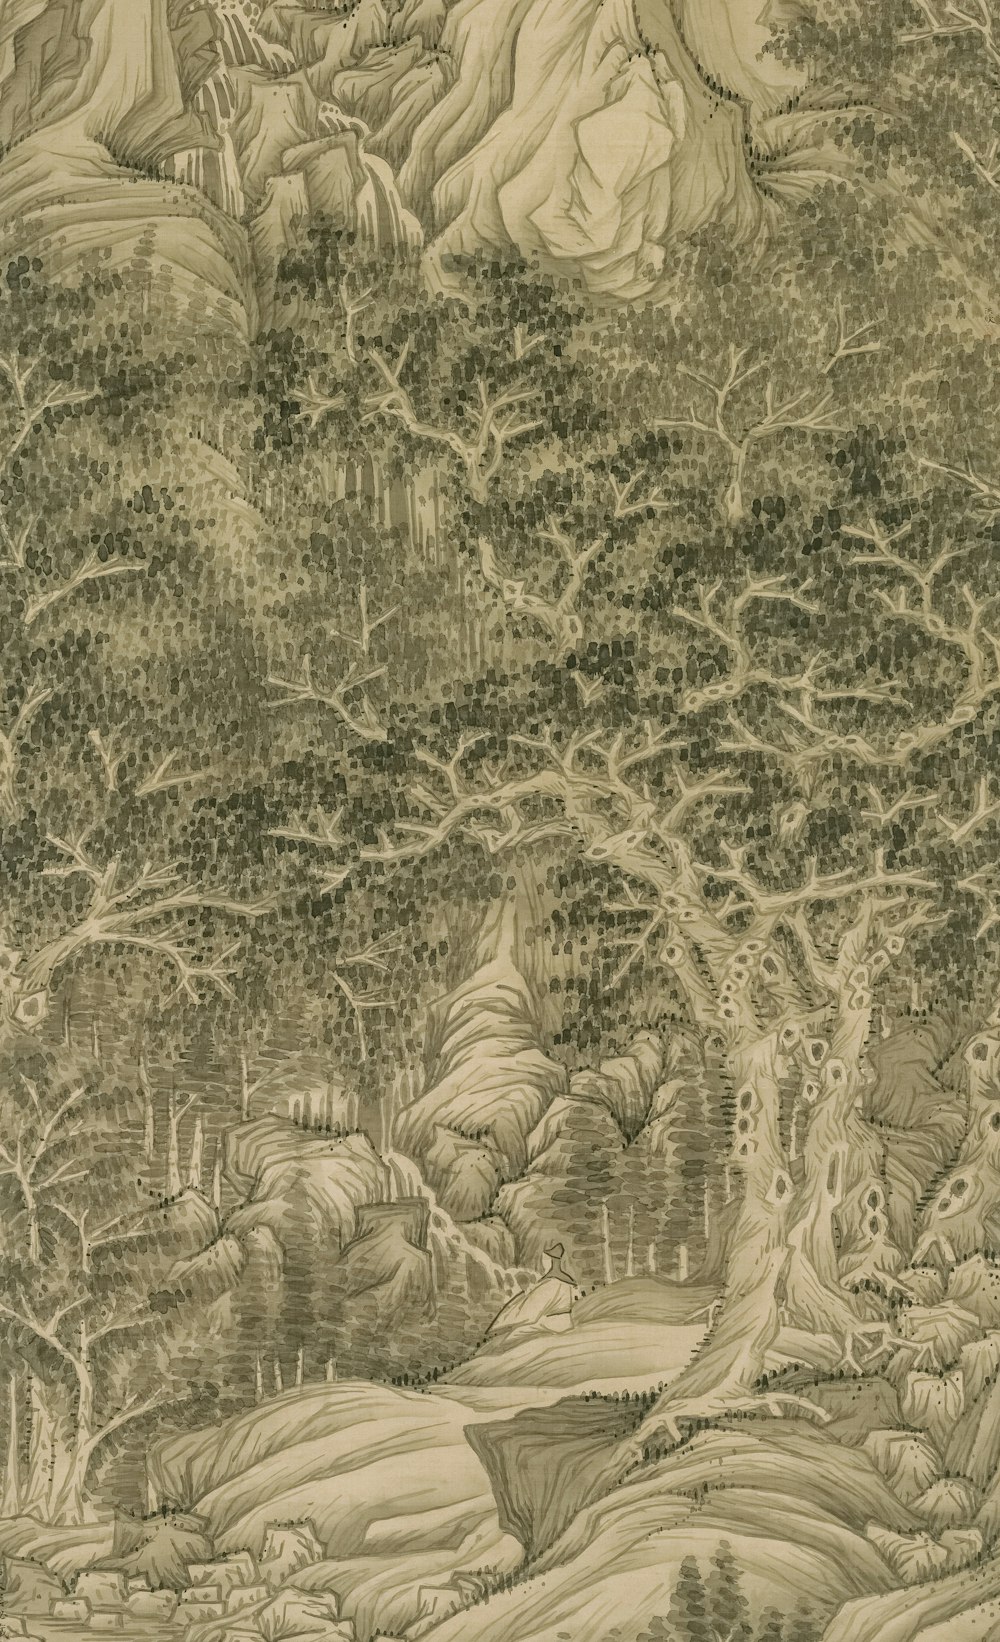 a drawing of a mountain landscape with trees